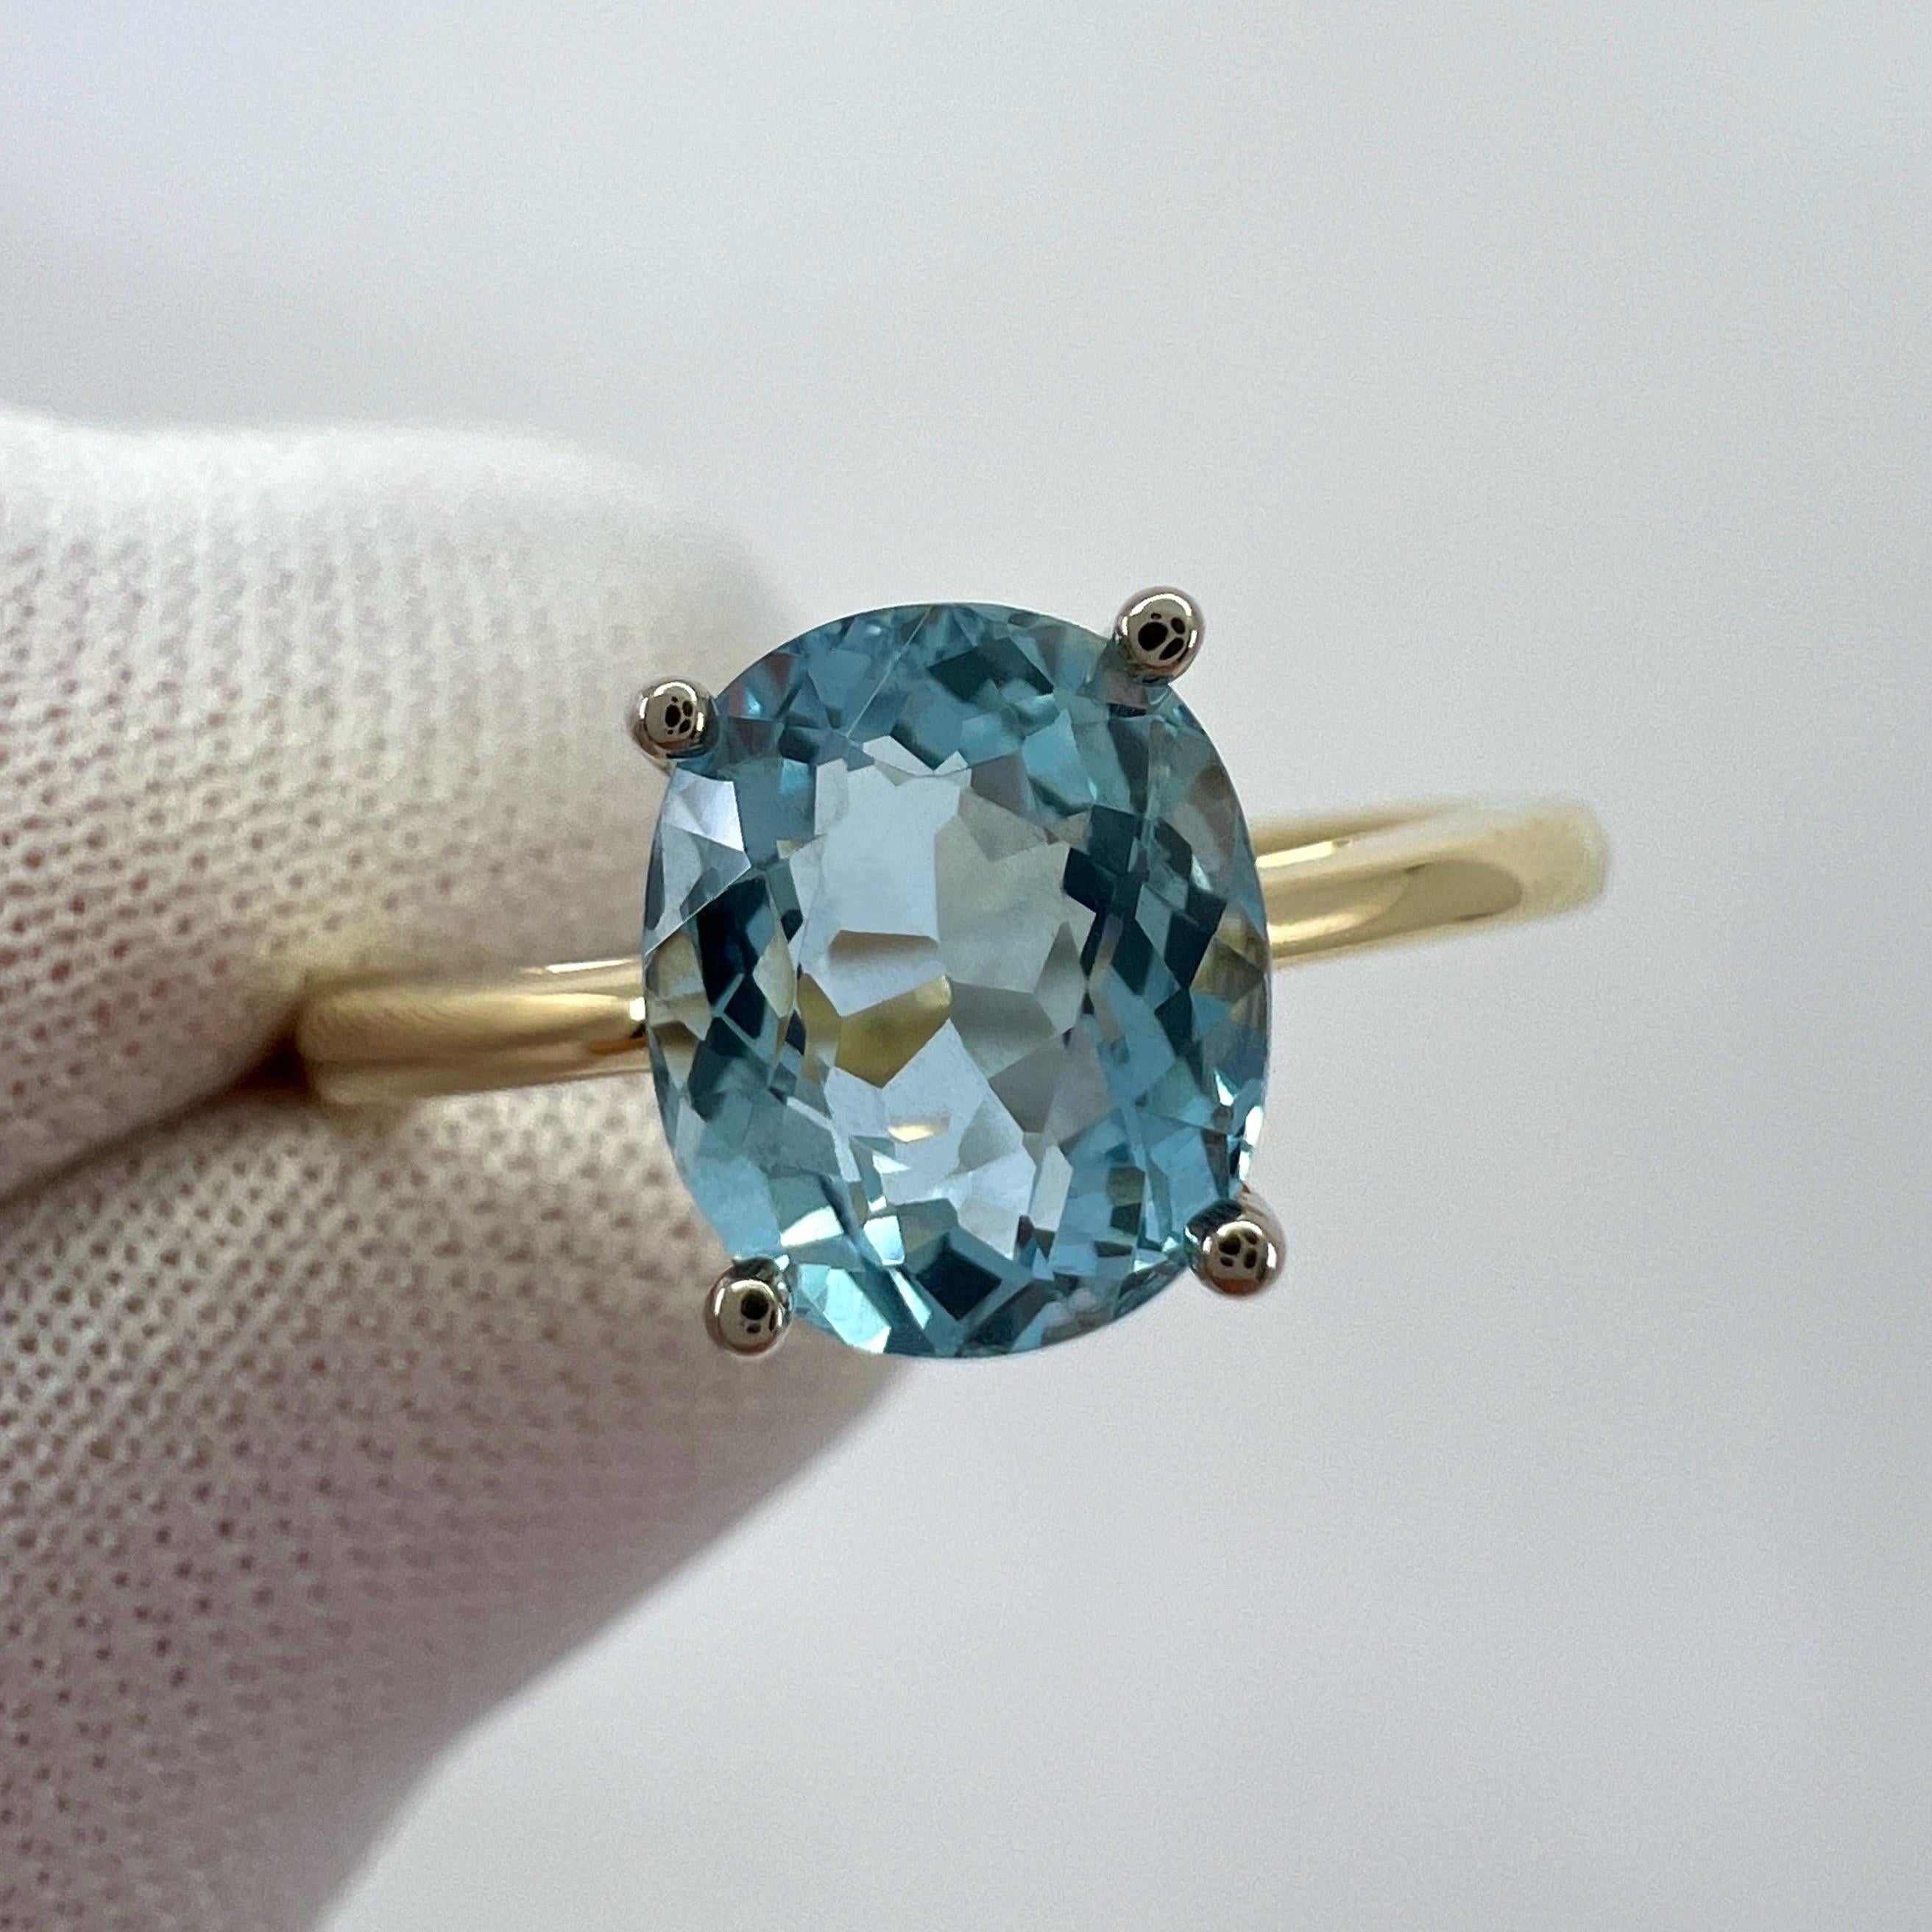 1.32ct Santa Maria Blue Aquamarine 18k White & Yellow Gold Oval Solitaire Ring For Sale 2